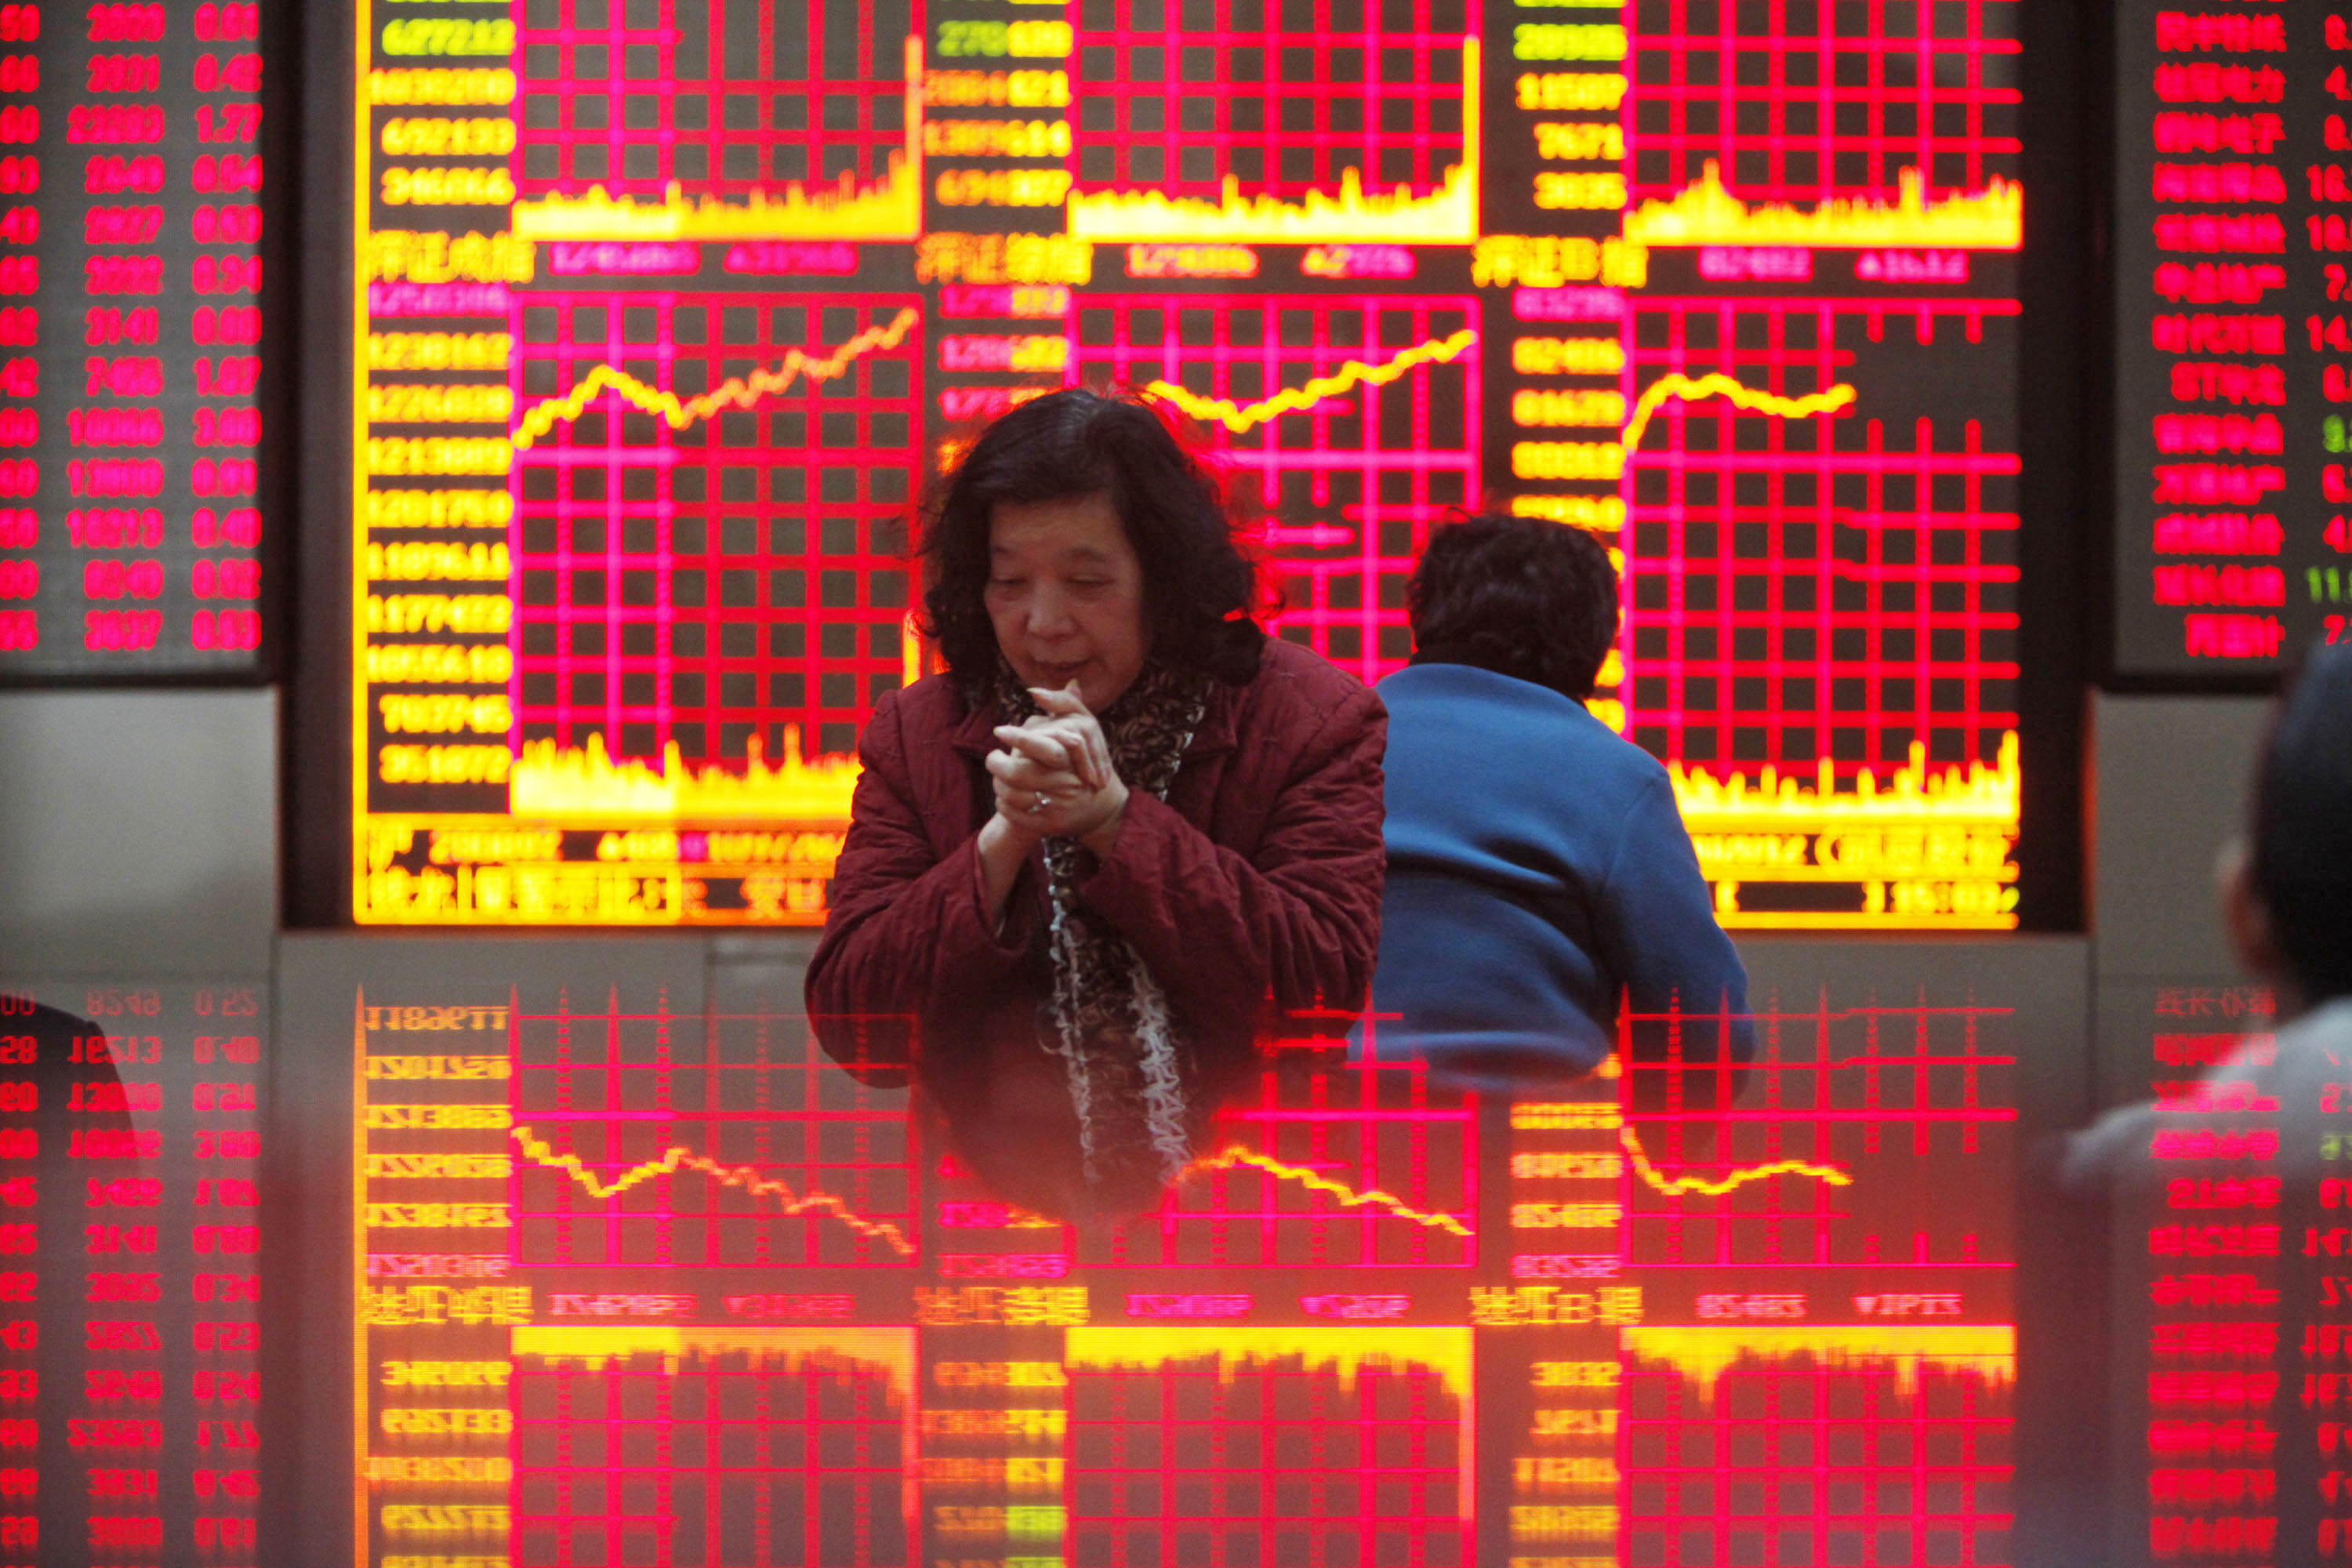 Trading Chinese stocks must be stressful.
